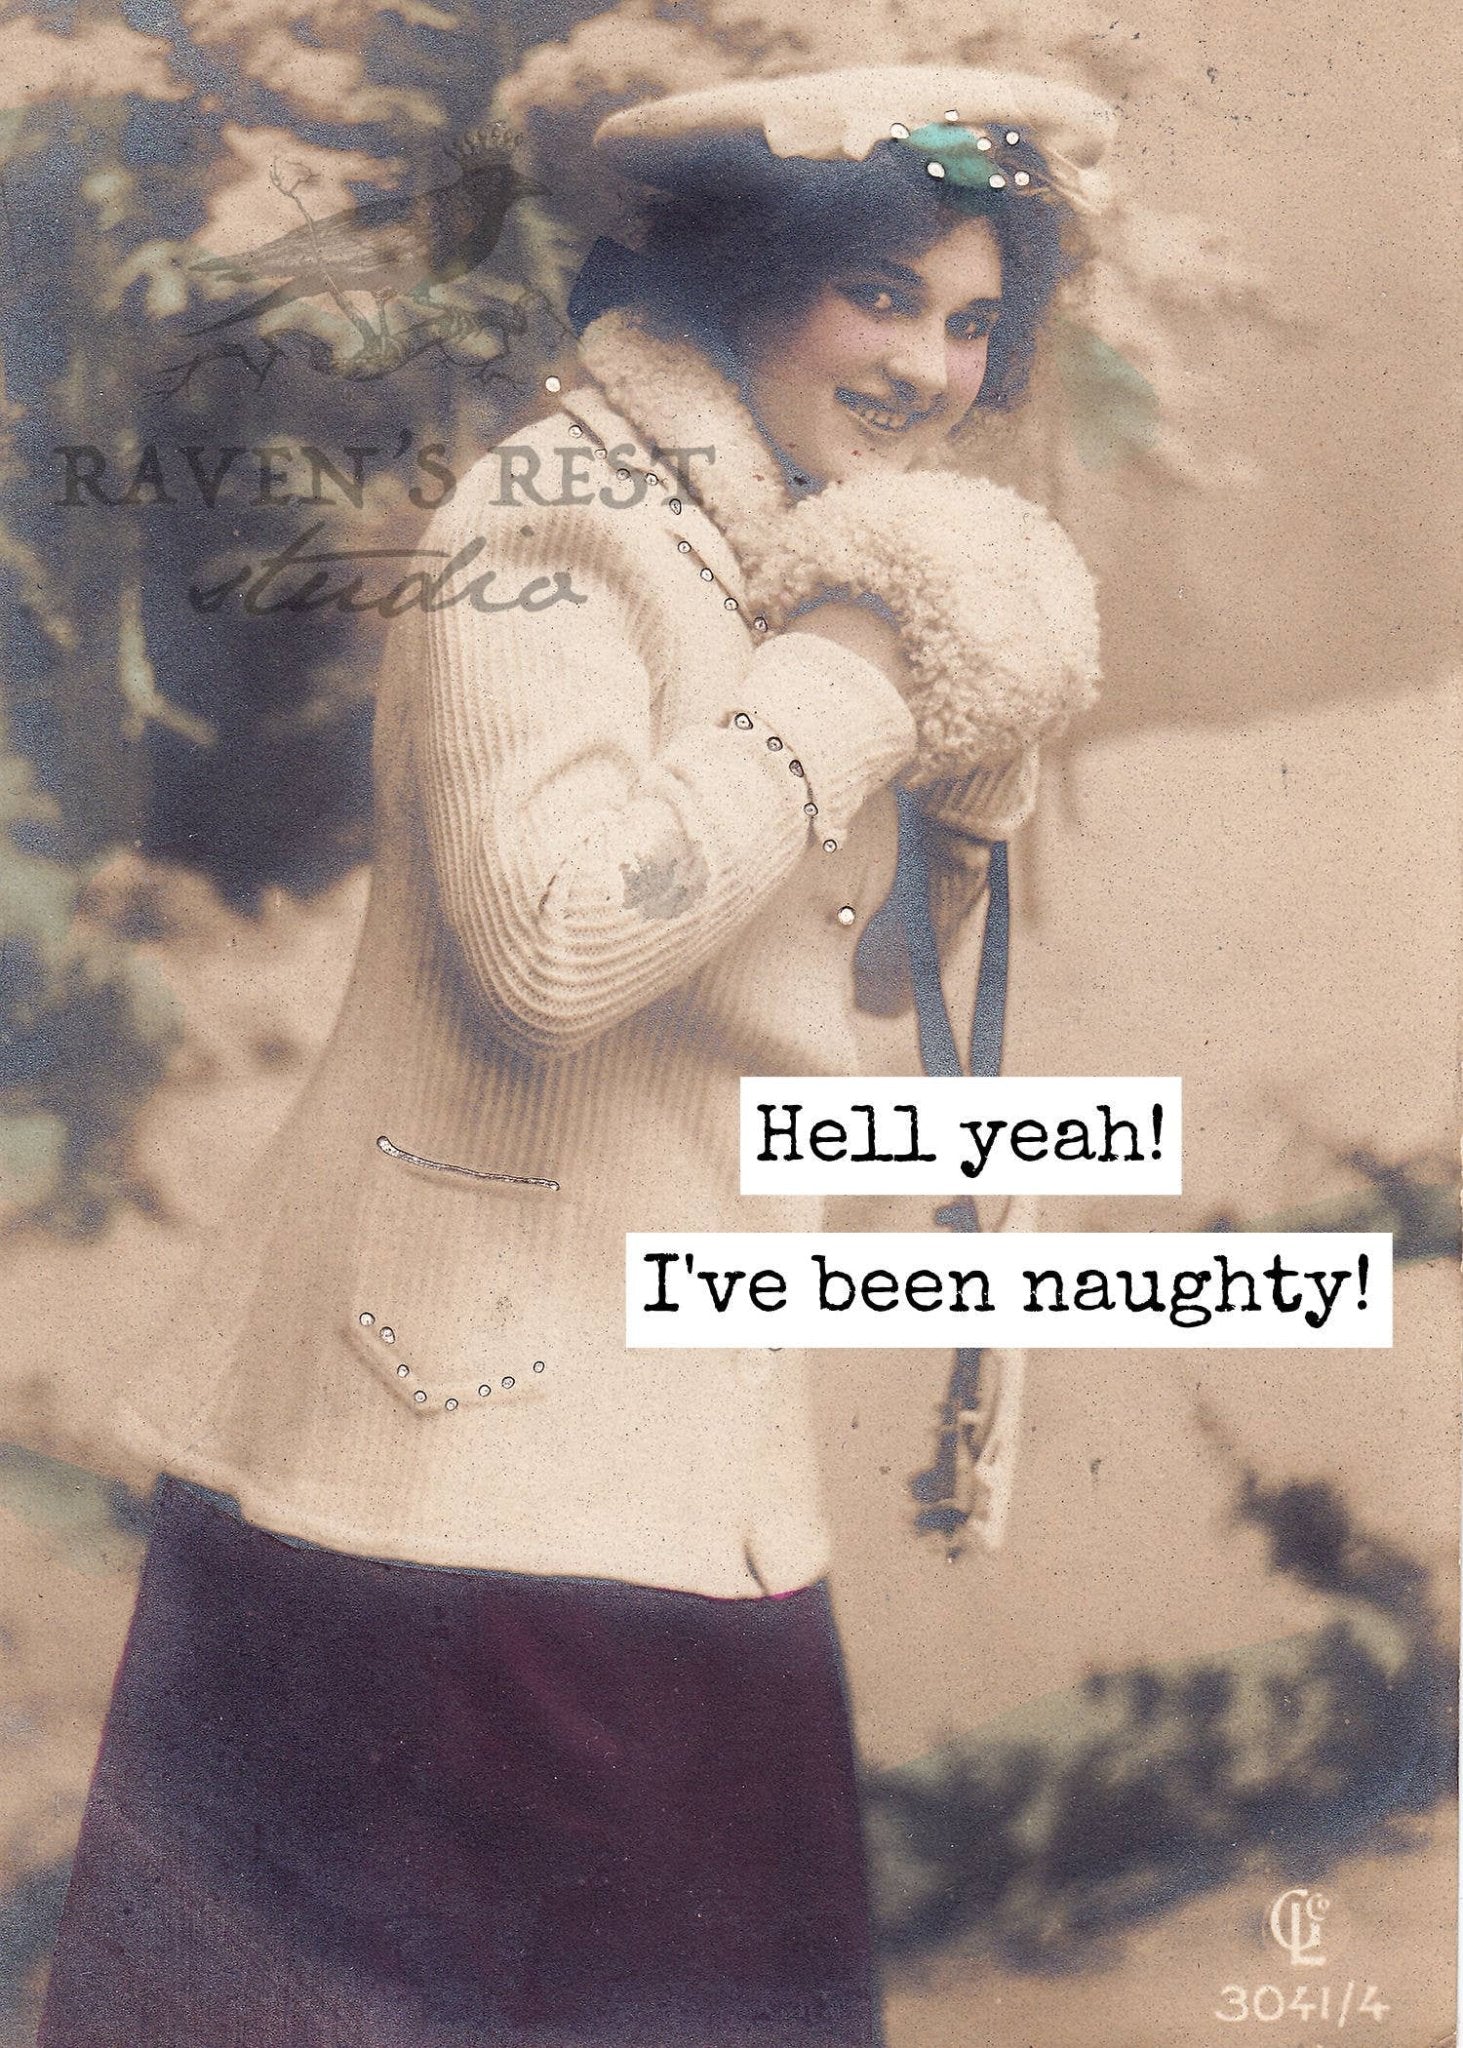 Hell Yeah! I've Been Naughty! Christmas Card - My Filosophy